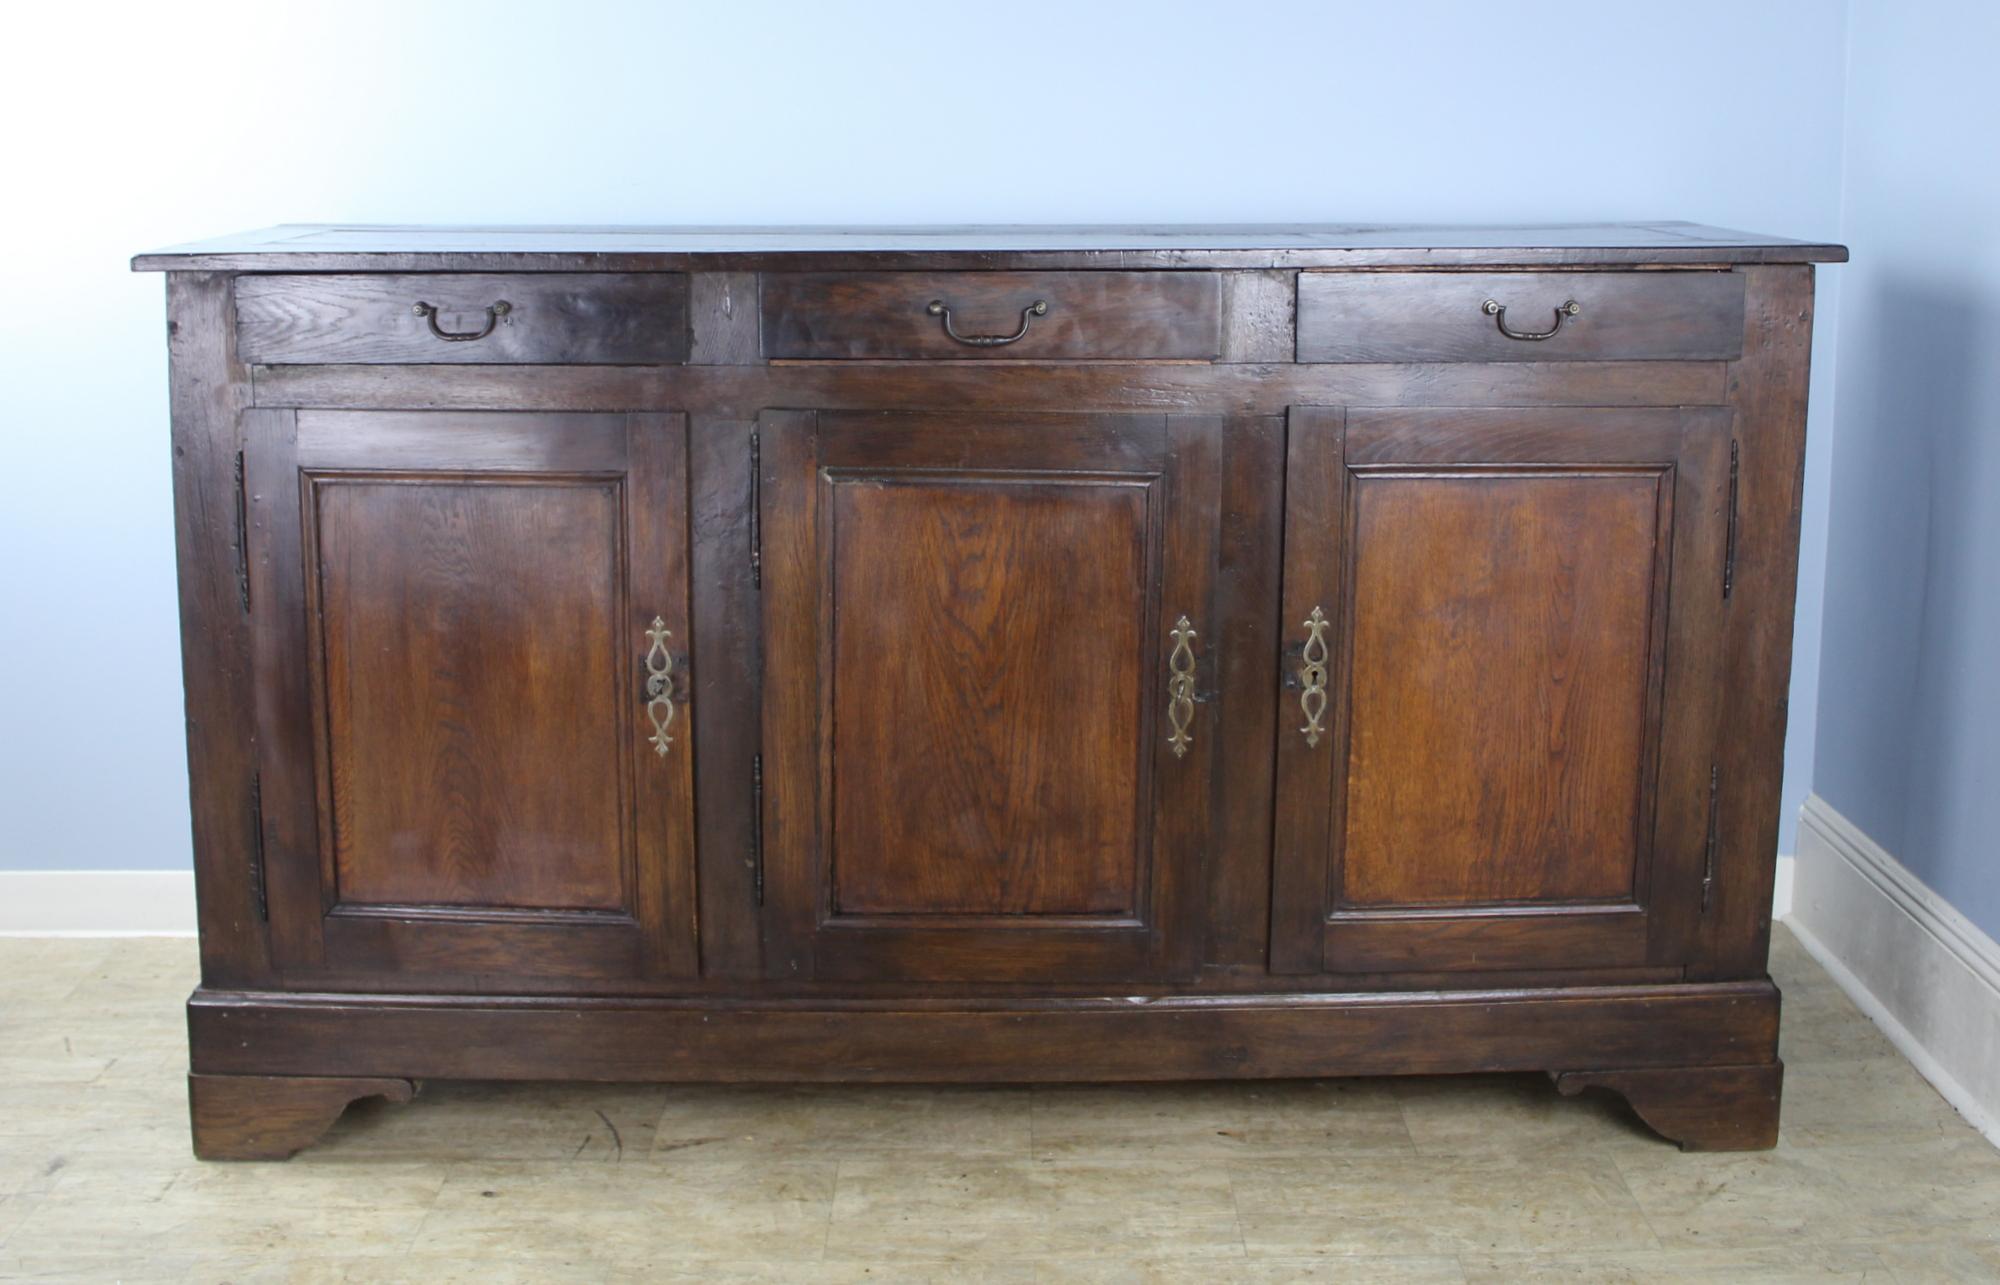 Very good, dark chestnut three-door enfilade with beautiful dark grain highlighted by well colored inset panels on the doors. Glorious glow and patina. Nice stylized feet. The brass hardware is antique, but not original. Excellent storage.